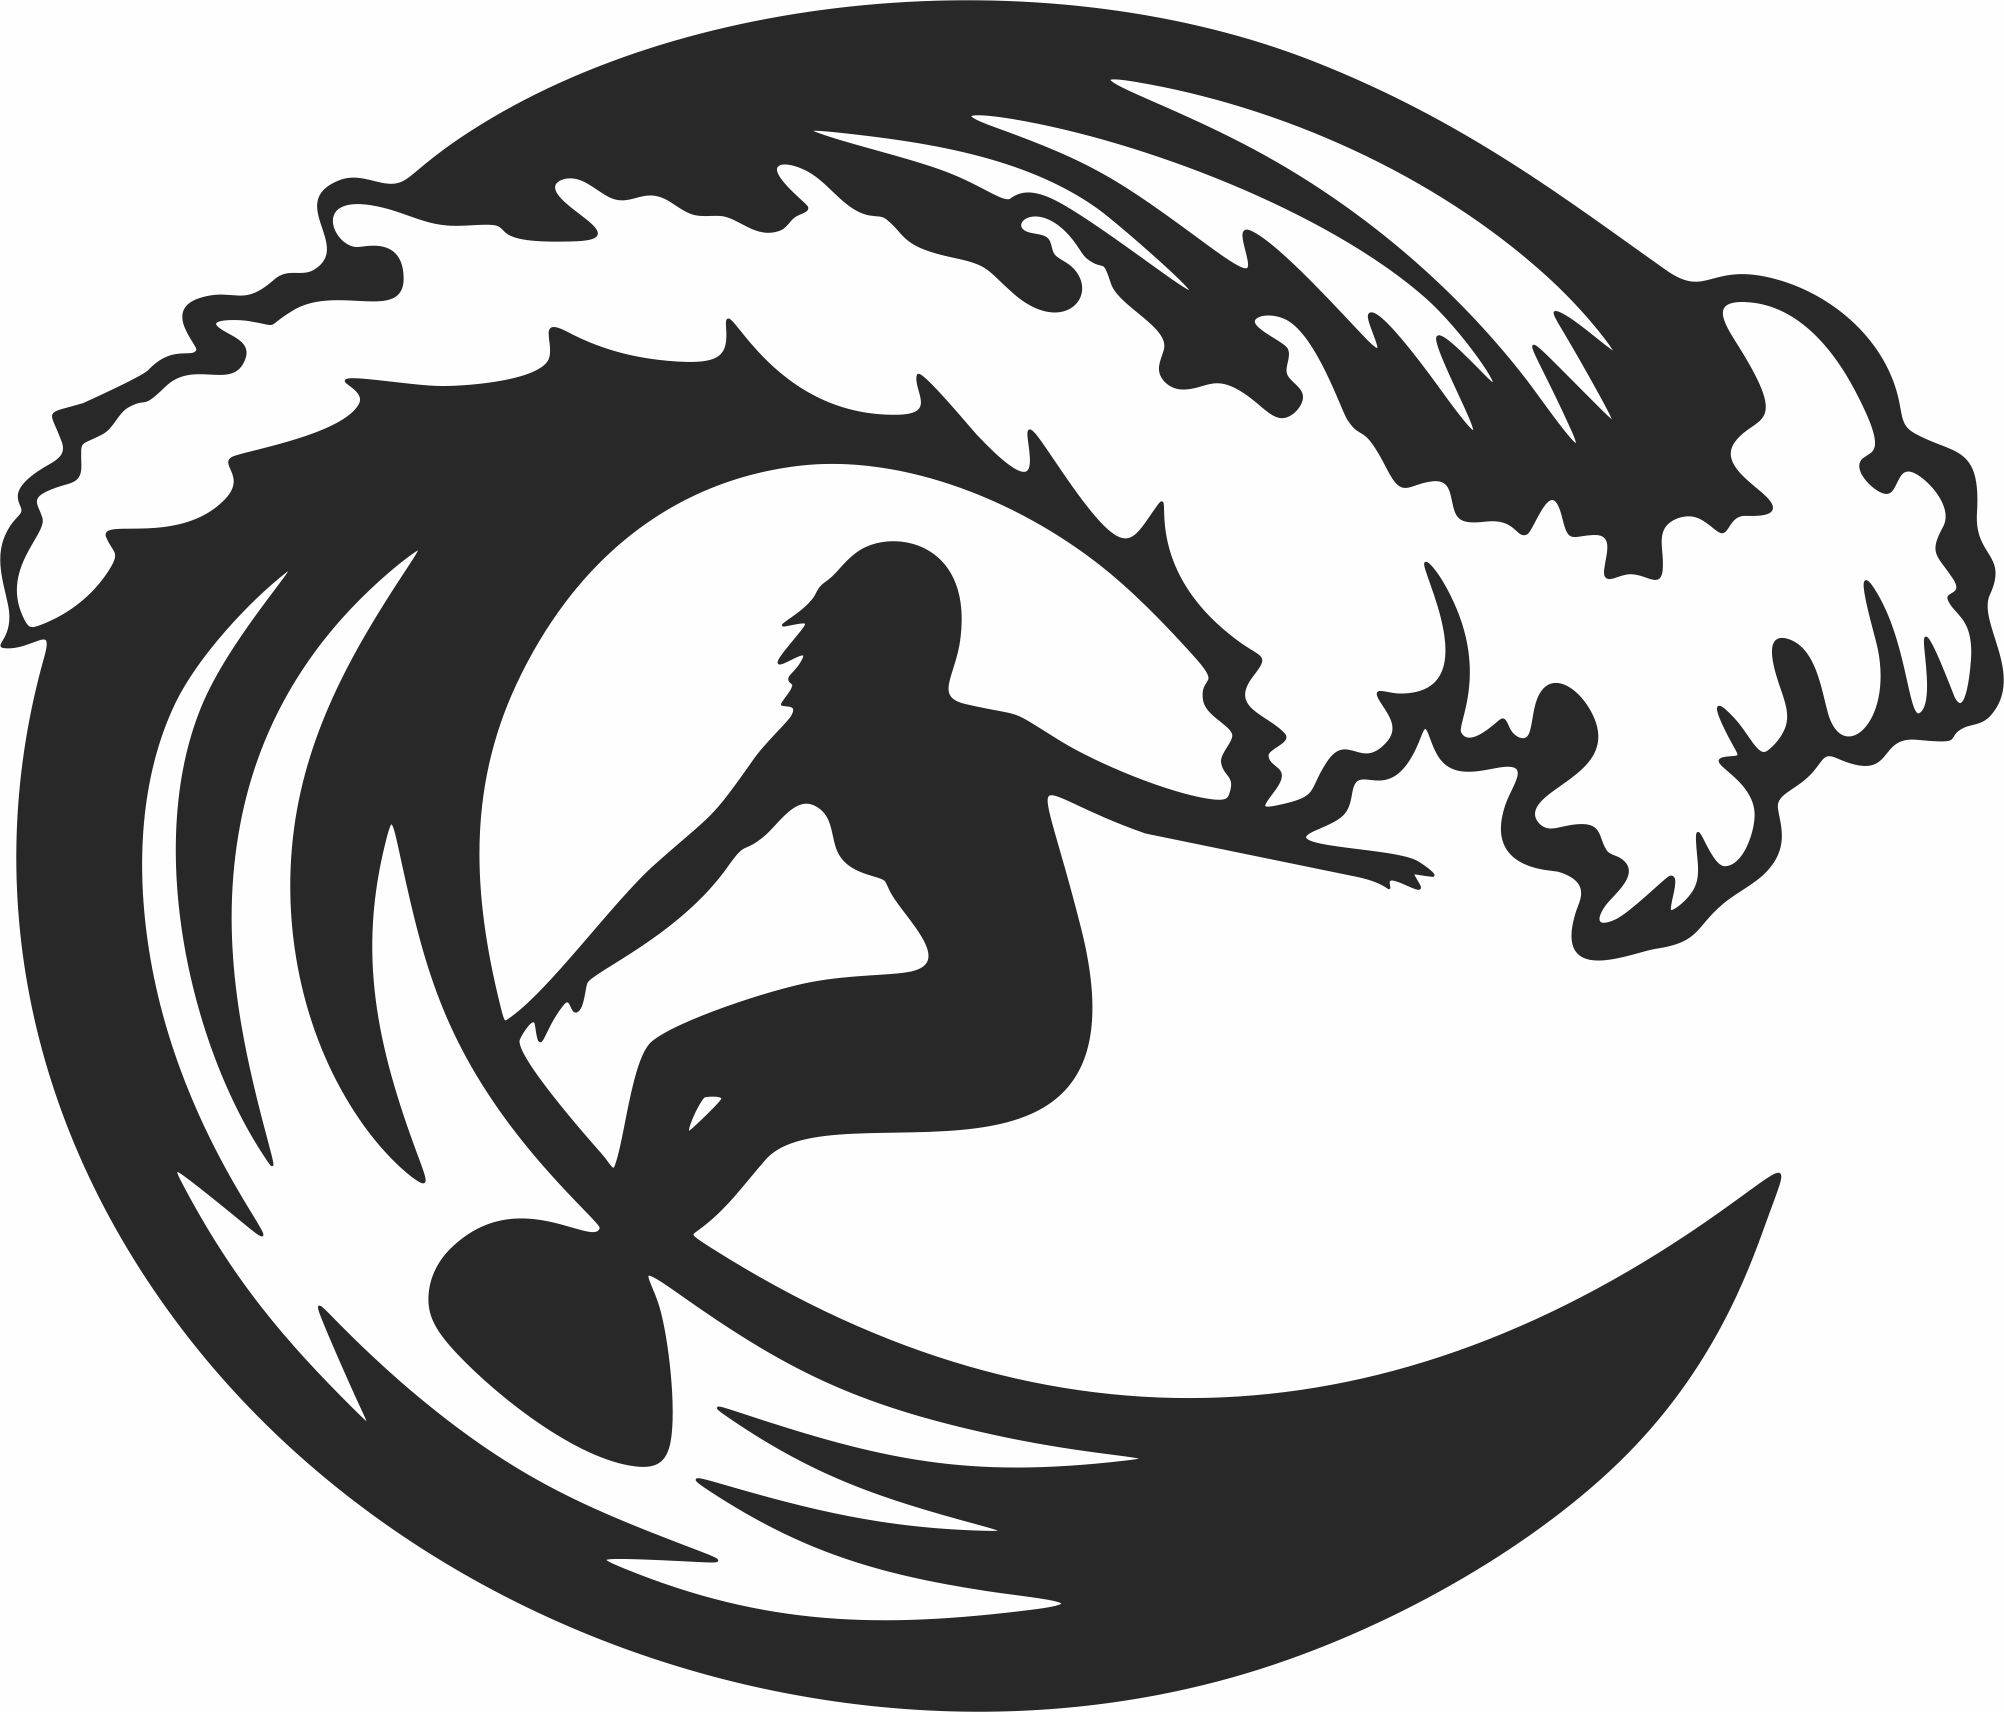 Surfing girl clipart - For Laser Cut DXF CDR SVG Files - free download ...